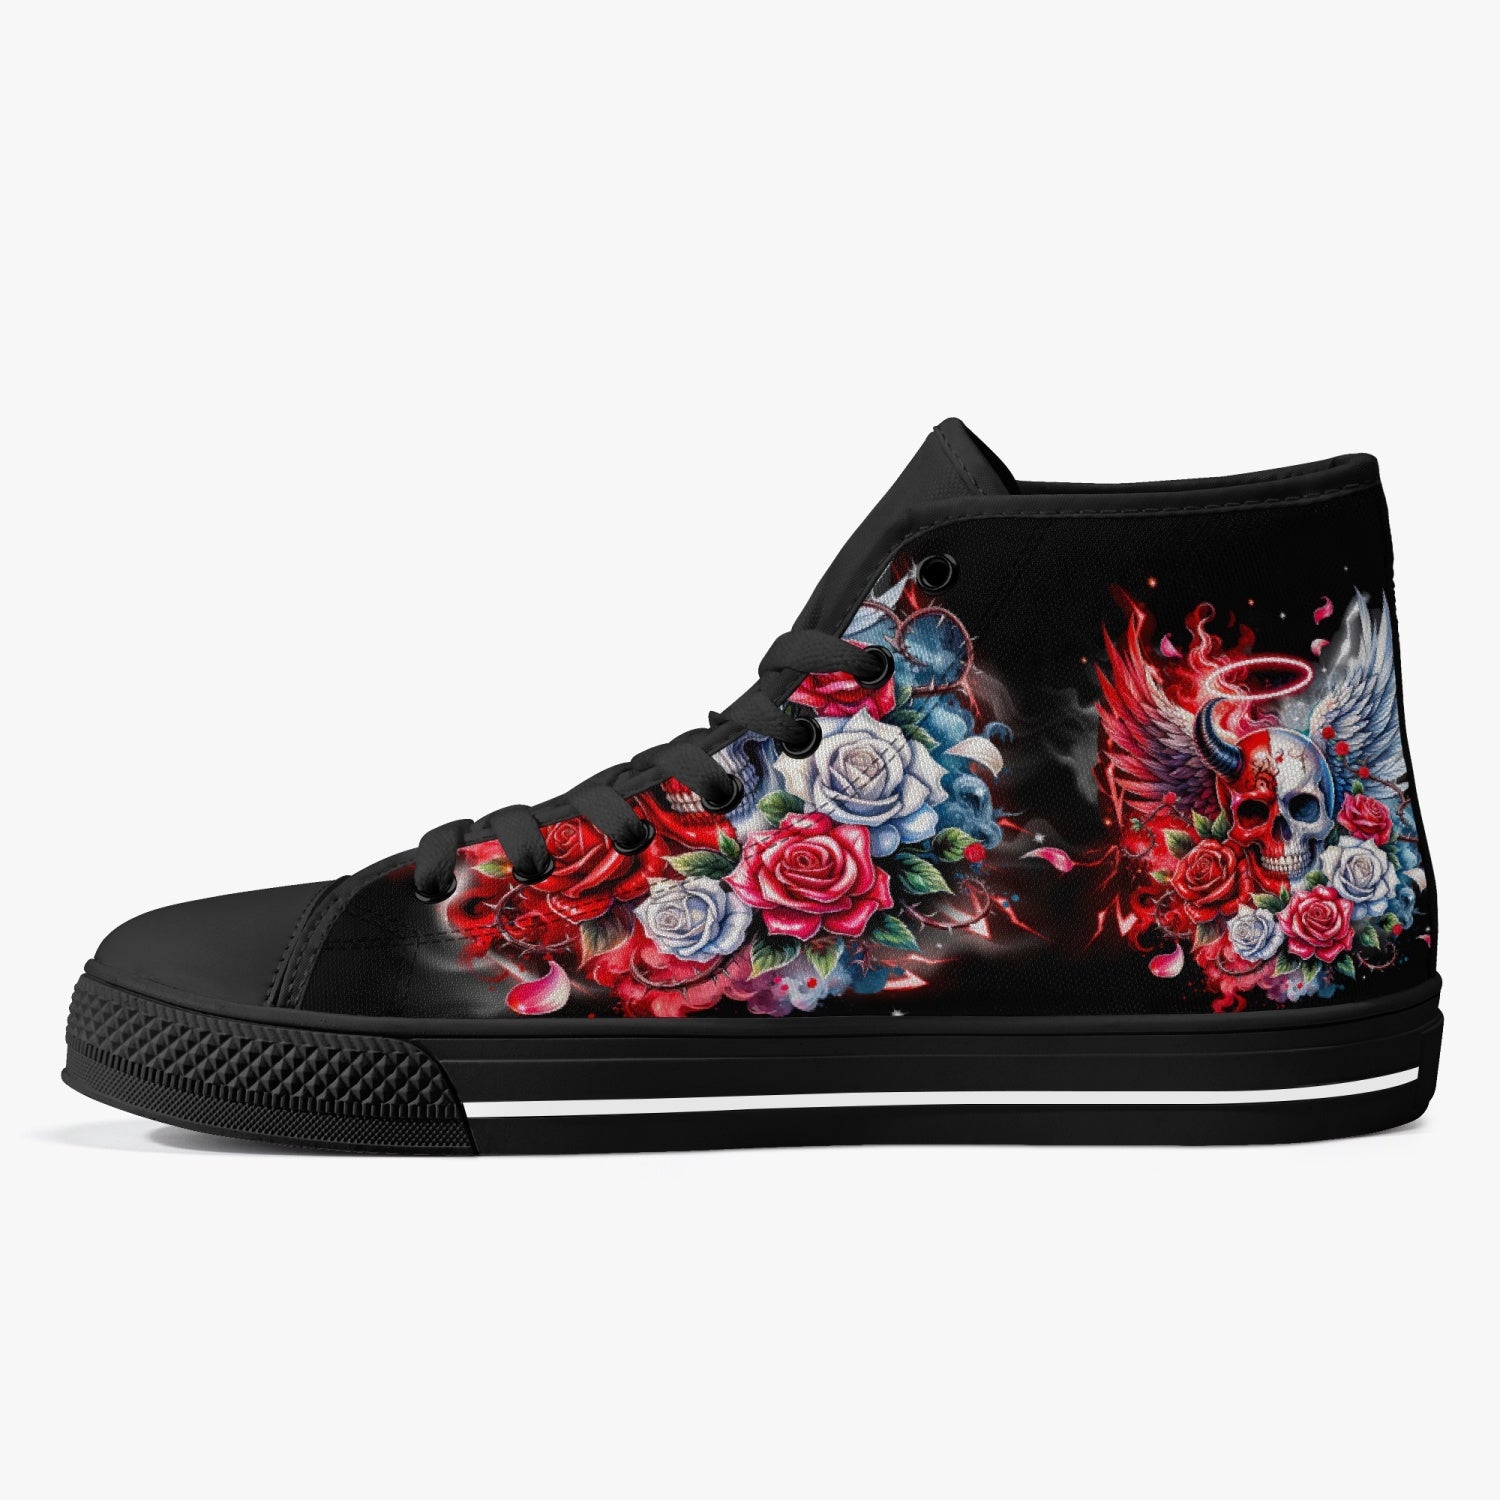 HEAVEN DON'T WANT ME HIGH TOP CANVAS SHOES - TYQY3001243